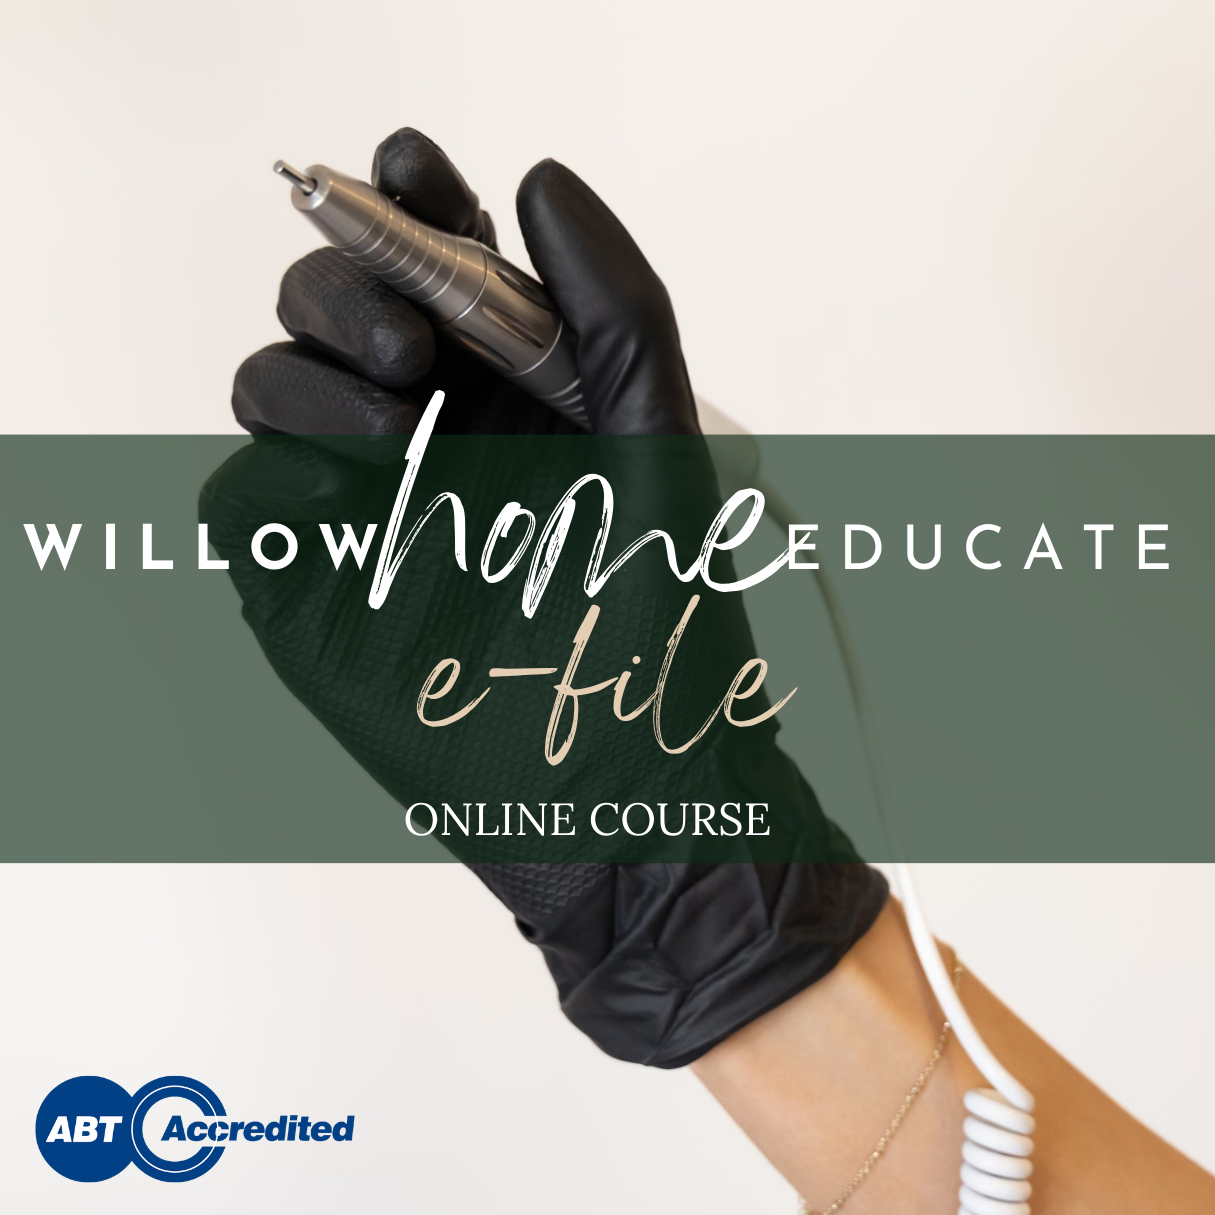 Willow Home Educate Online E-file Course